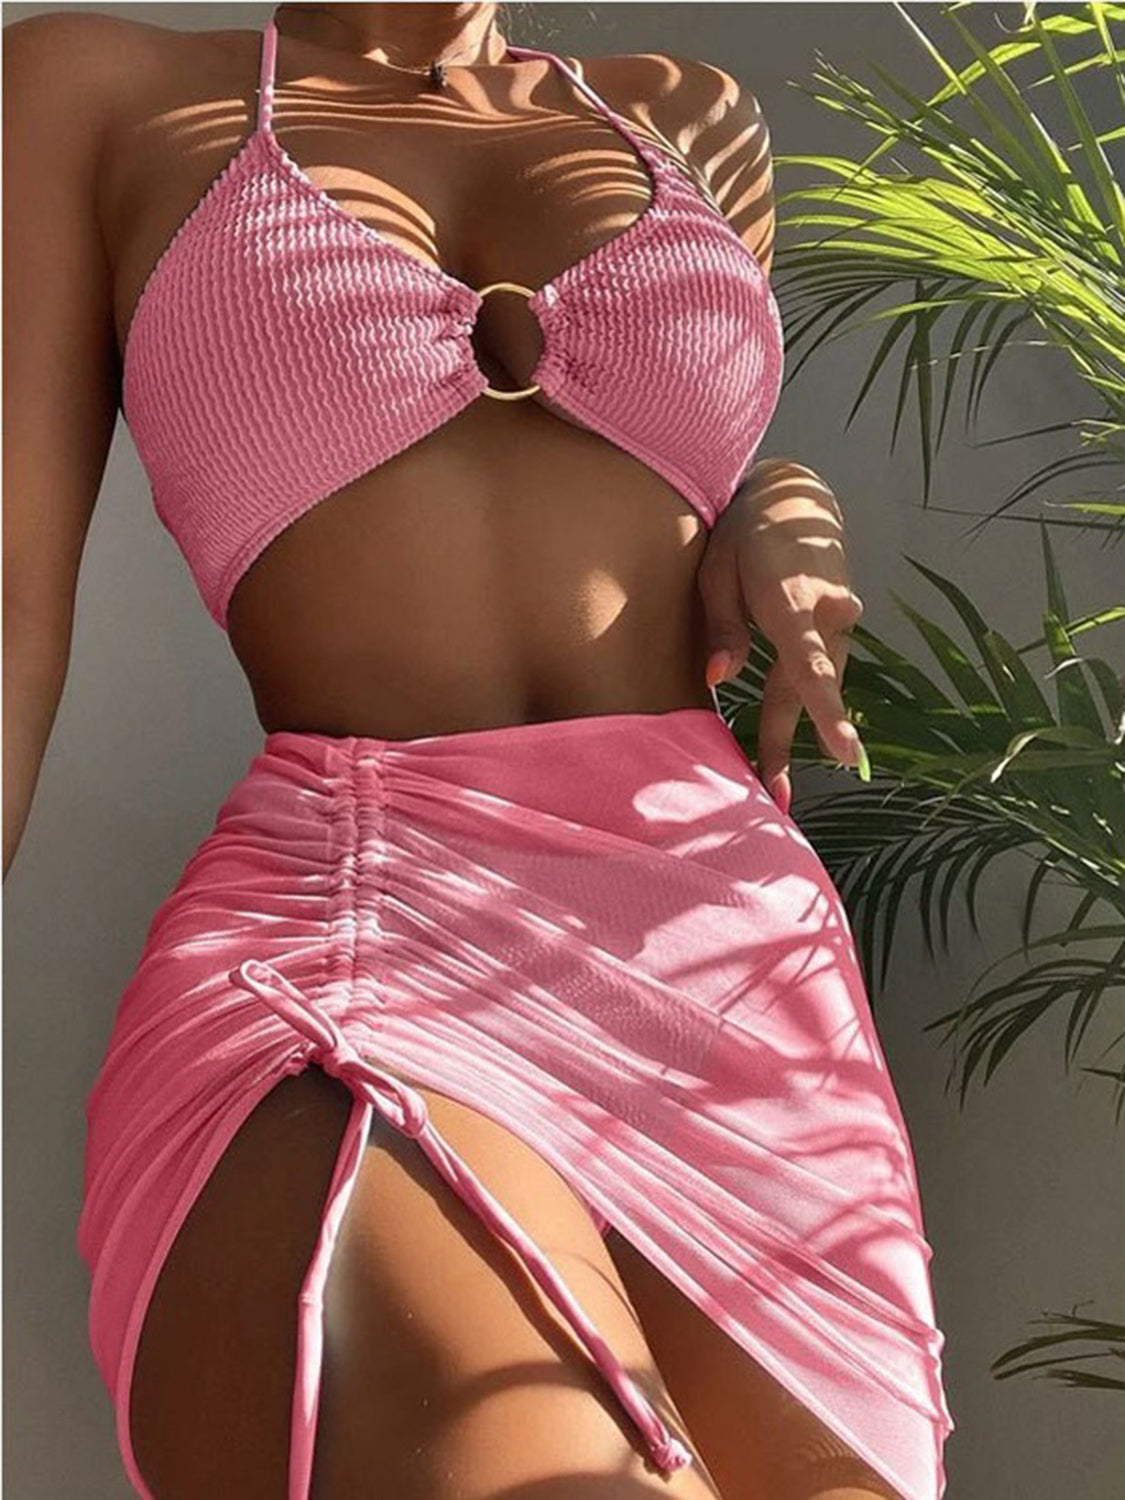 Embrace summer with our chic pink ribbed bikini. Stylish and perfect for any beach day or poolside escape.